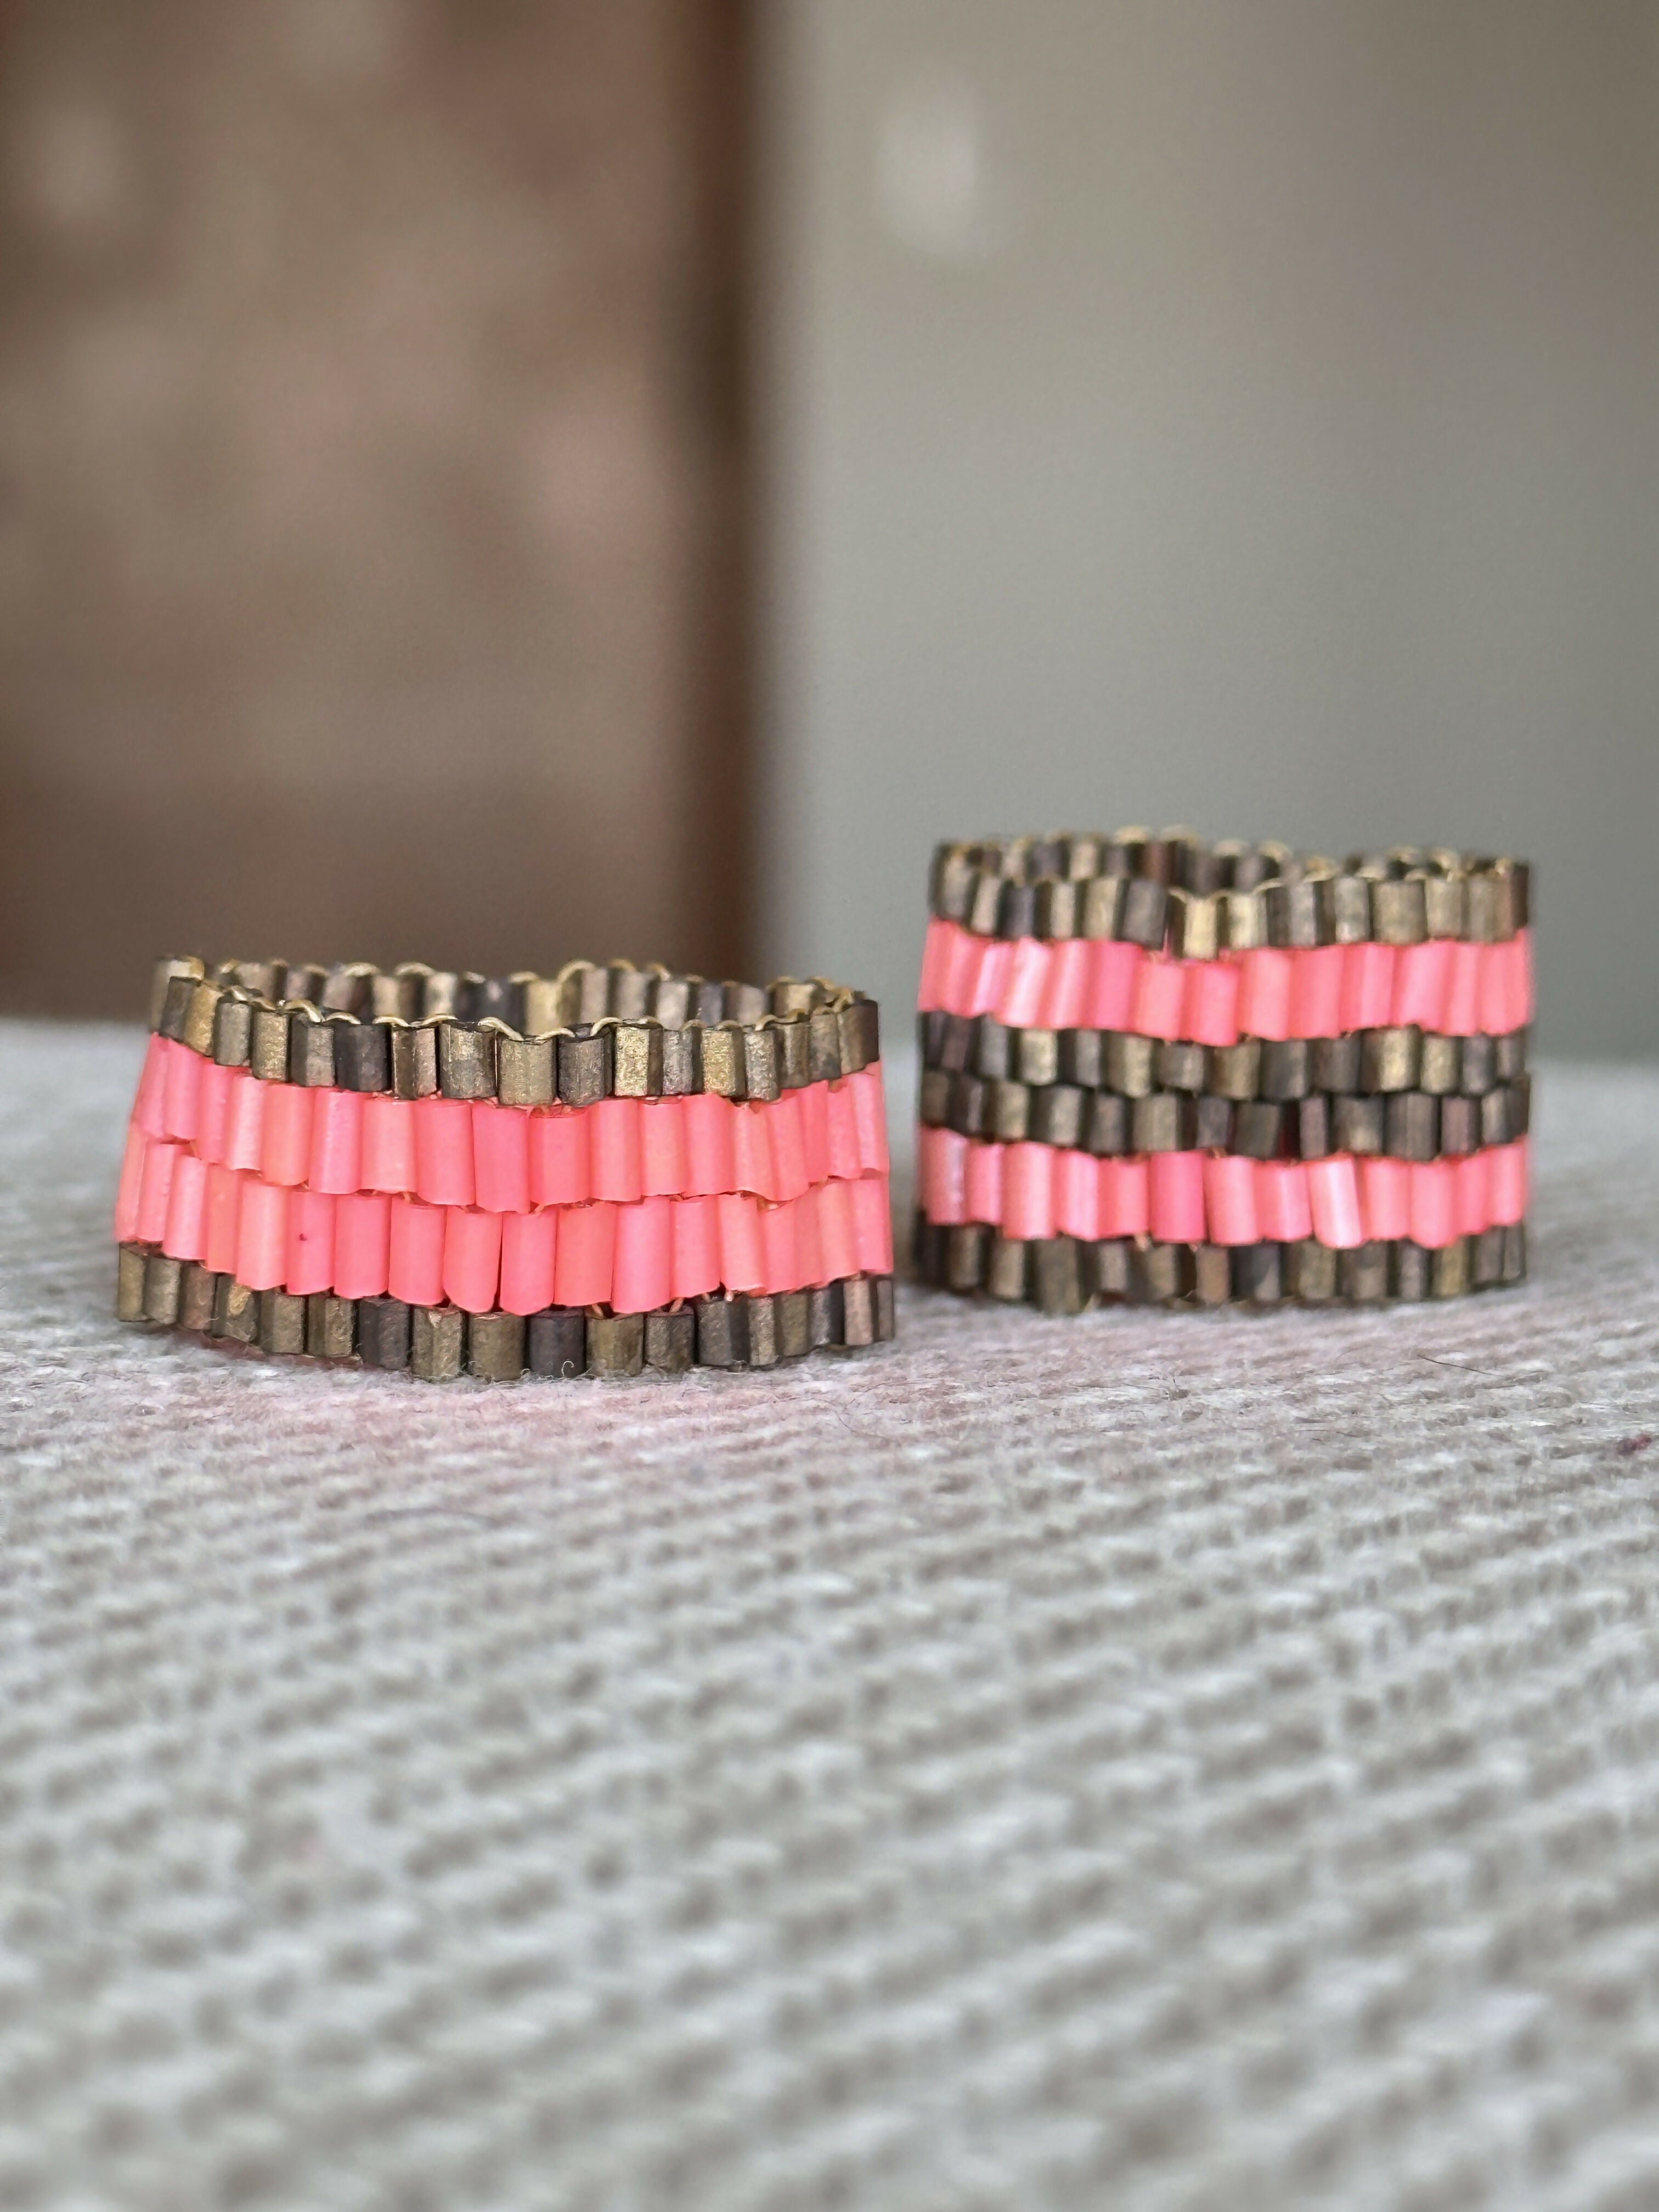 The PUT A RING ON IT collection: Lines serie 13, 6 rows!